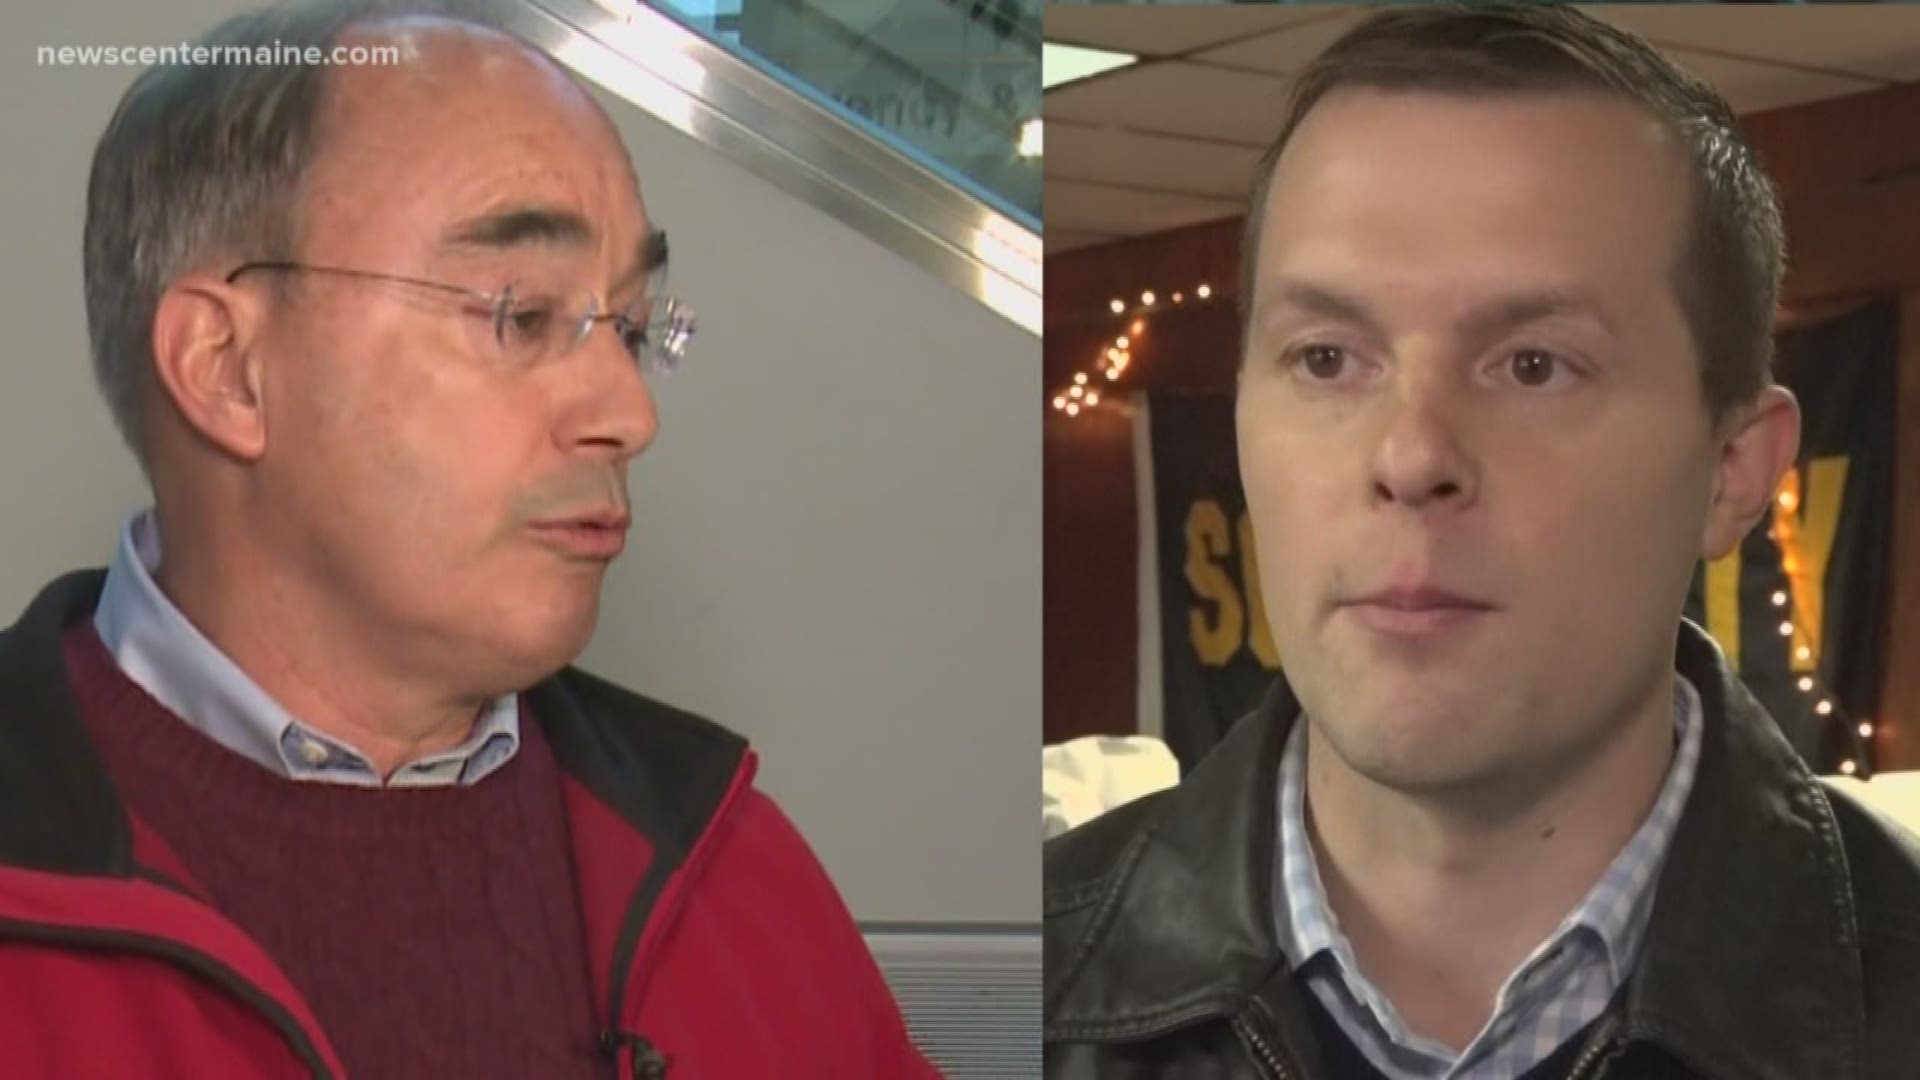 Congressman Bruce Poliquin got another day in court today in his effort to nullify the ranked-choice election he lost to Jared Golden.